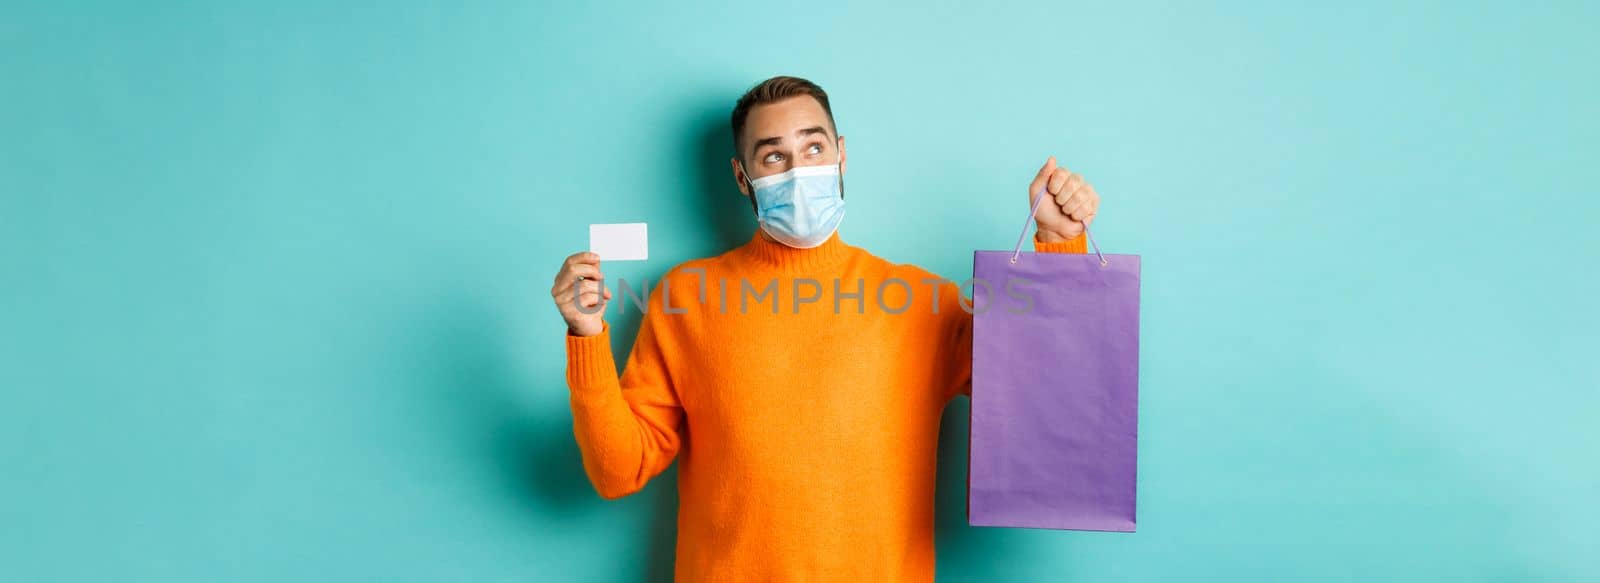 Covid-19, pandemic and lifestyle concept. Thoughtful man in face mask, holding purple shopping bag and credit card, thinking or imaging, standing over turquoise background by Benzoix